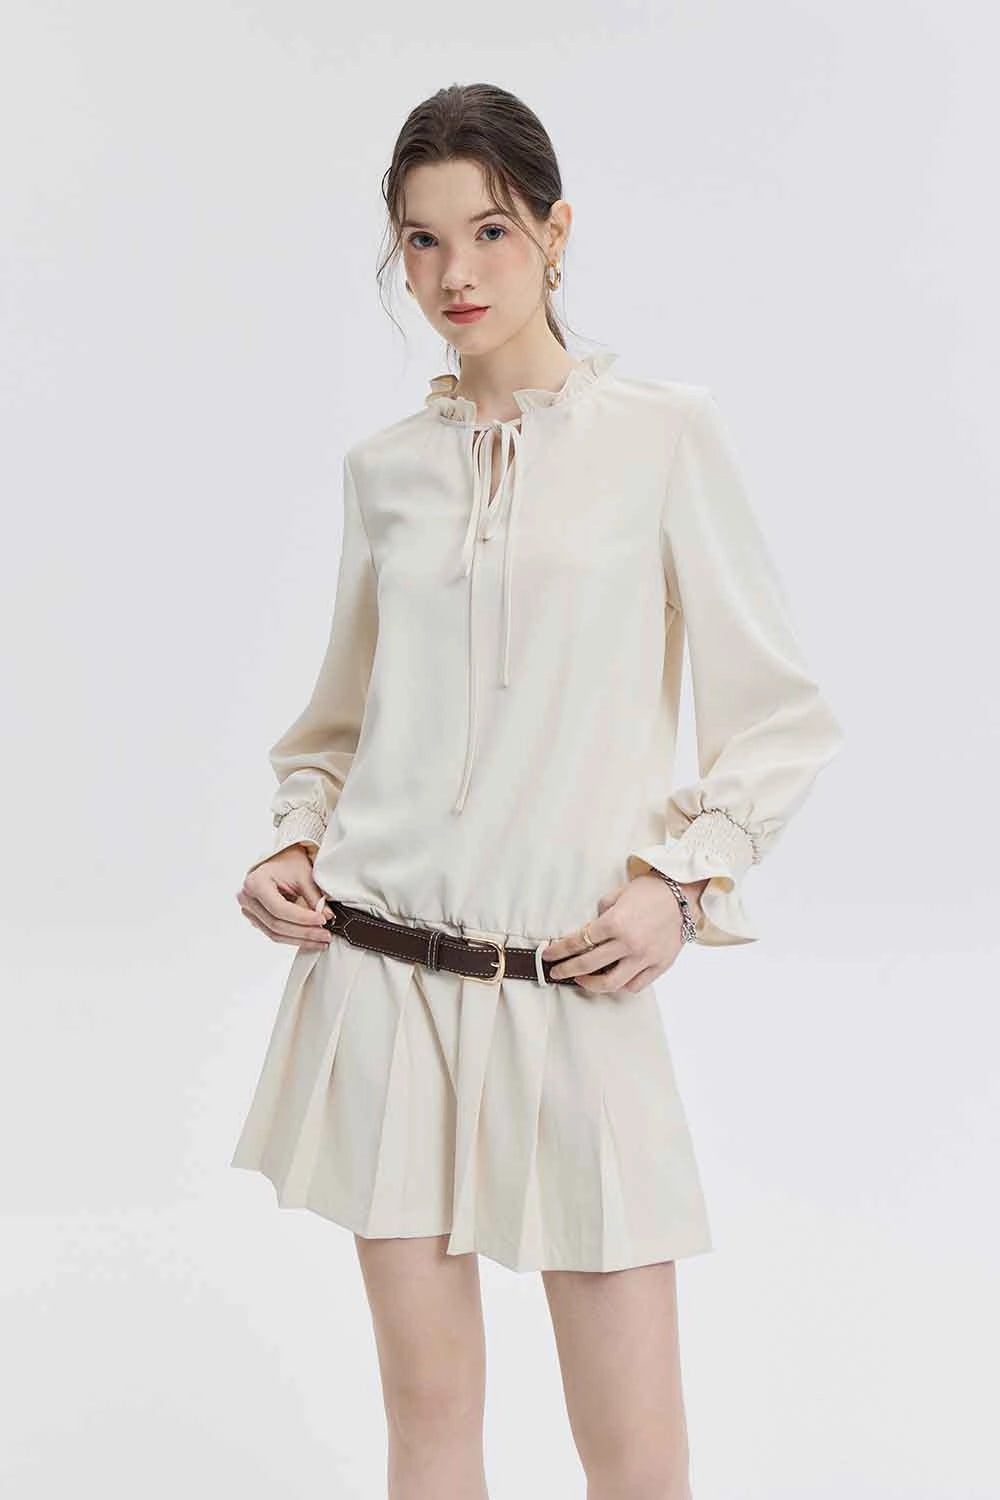 Women's Long Sleeve Dress with Ruffle Neckline and Tie Detail